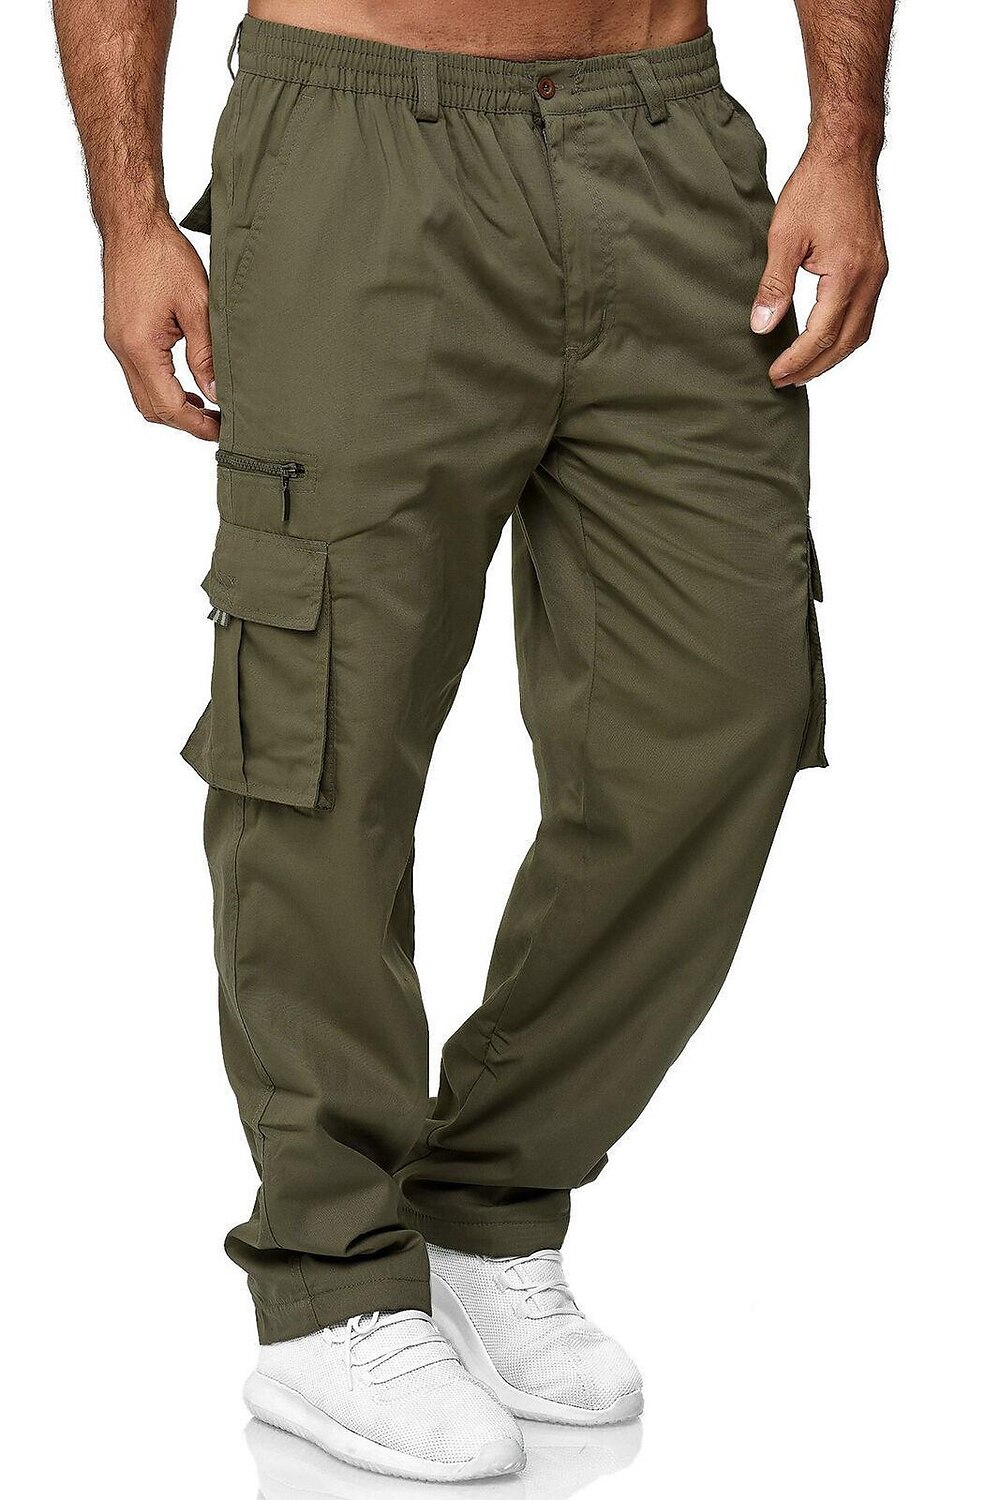 Men's Ripstop Relaxed Fit Tactical Straight Outdoor Hiking Long Lightweight Work Pants